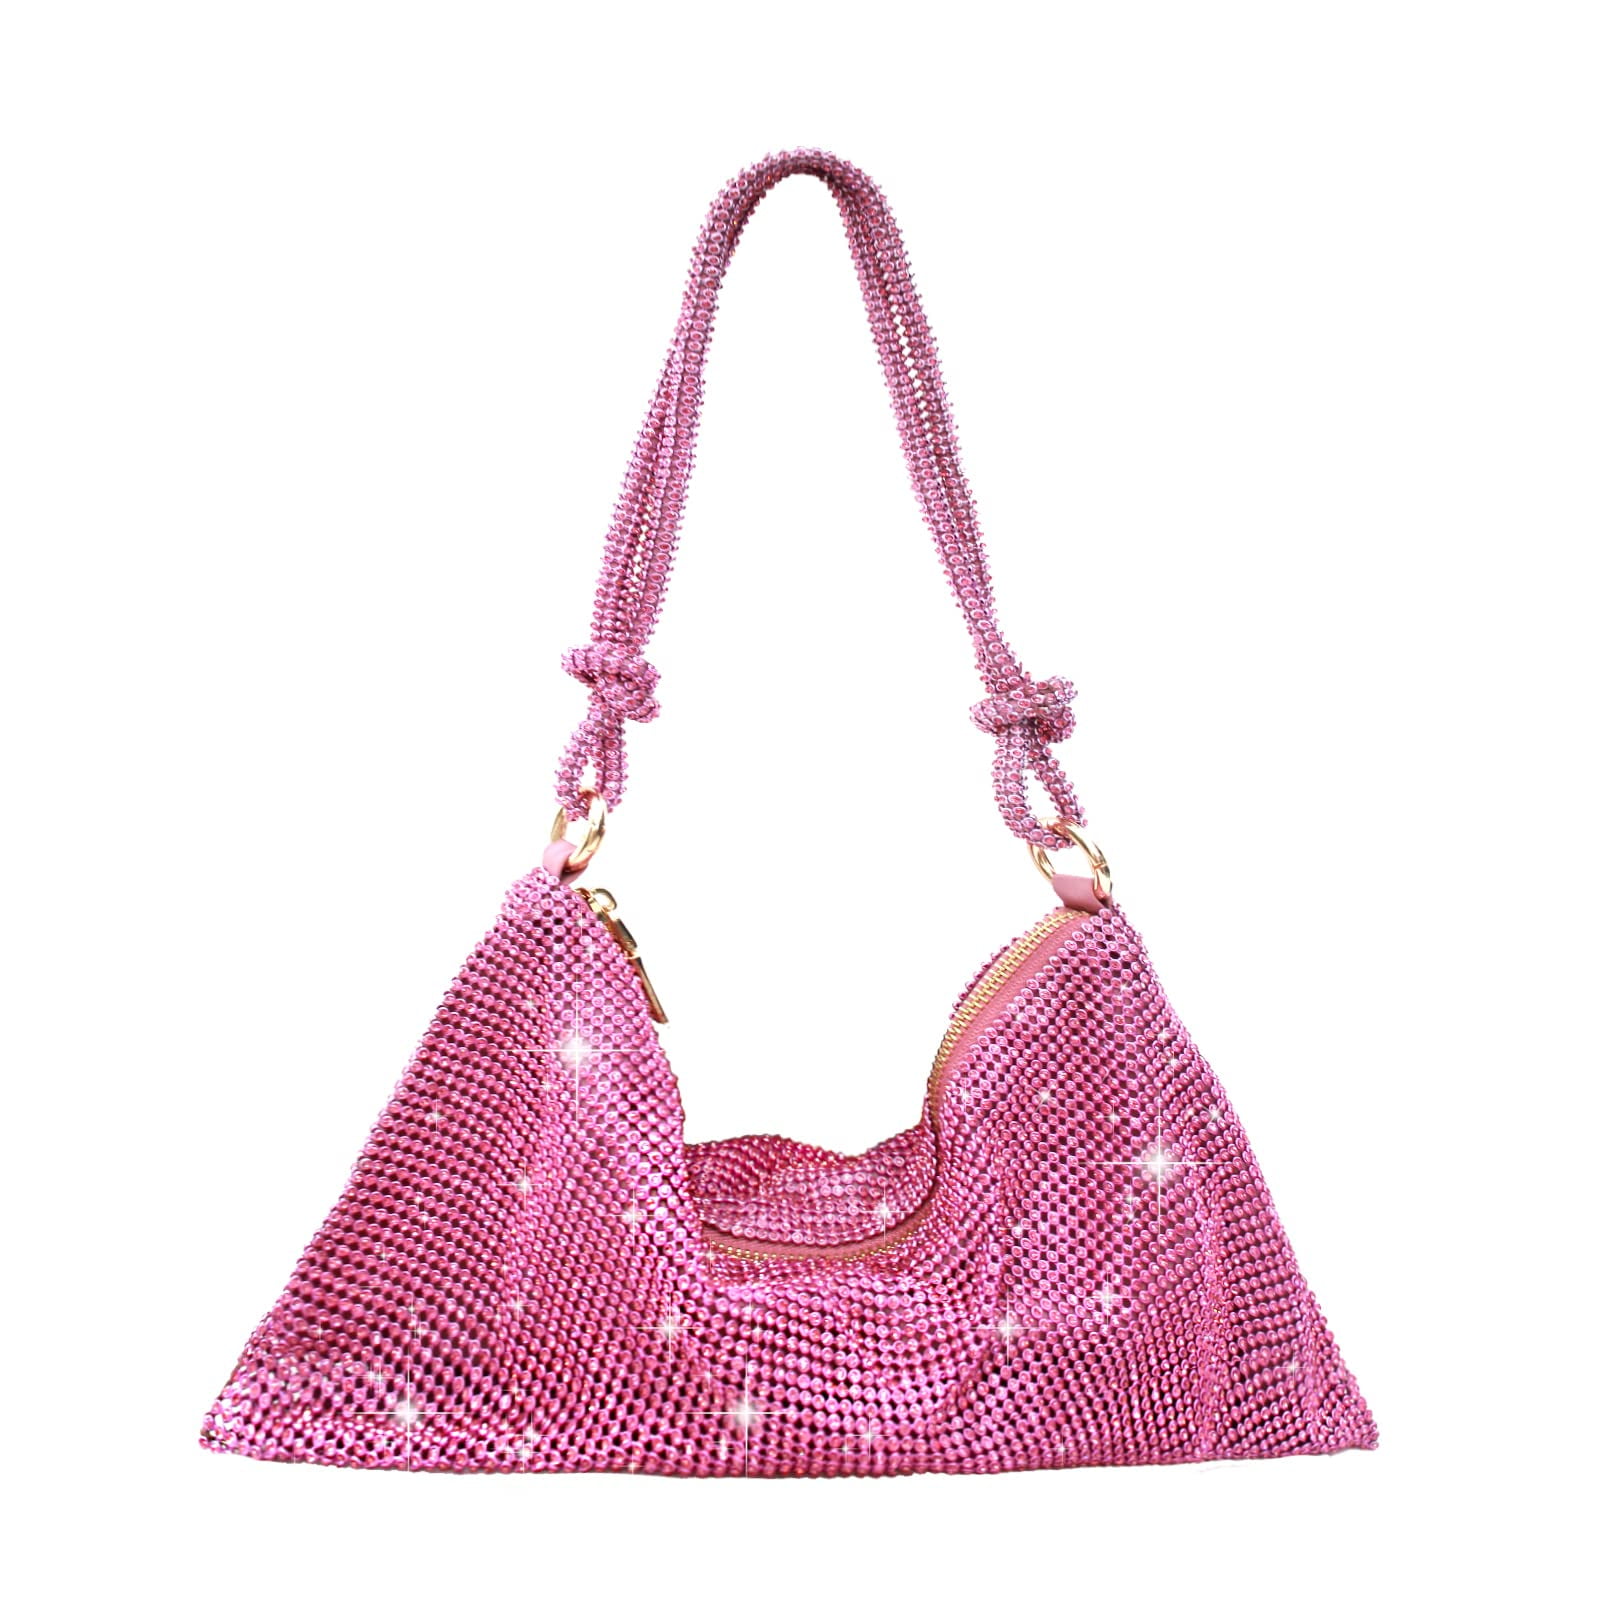 Selena Gomez Dream Out Loud Sequin Hobo Purse New With Tag | eBay